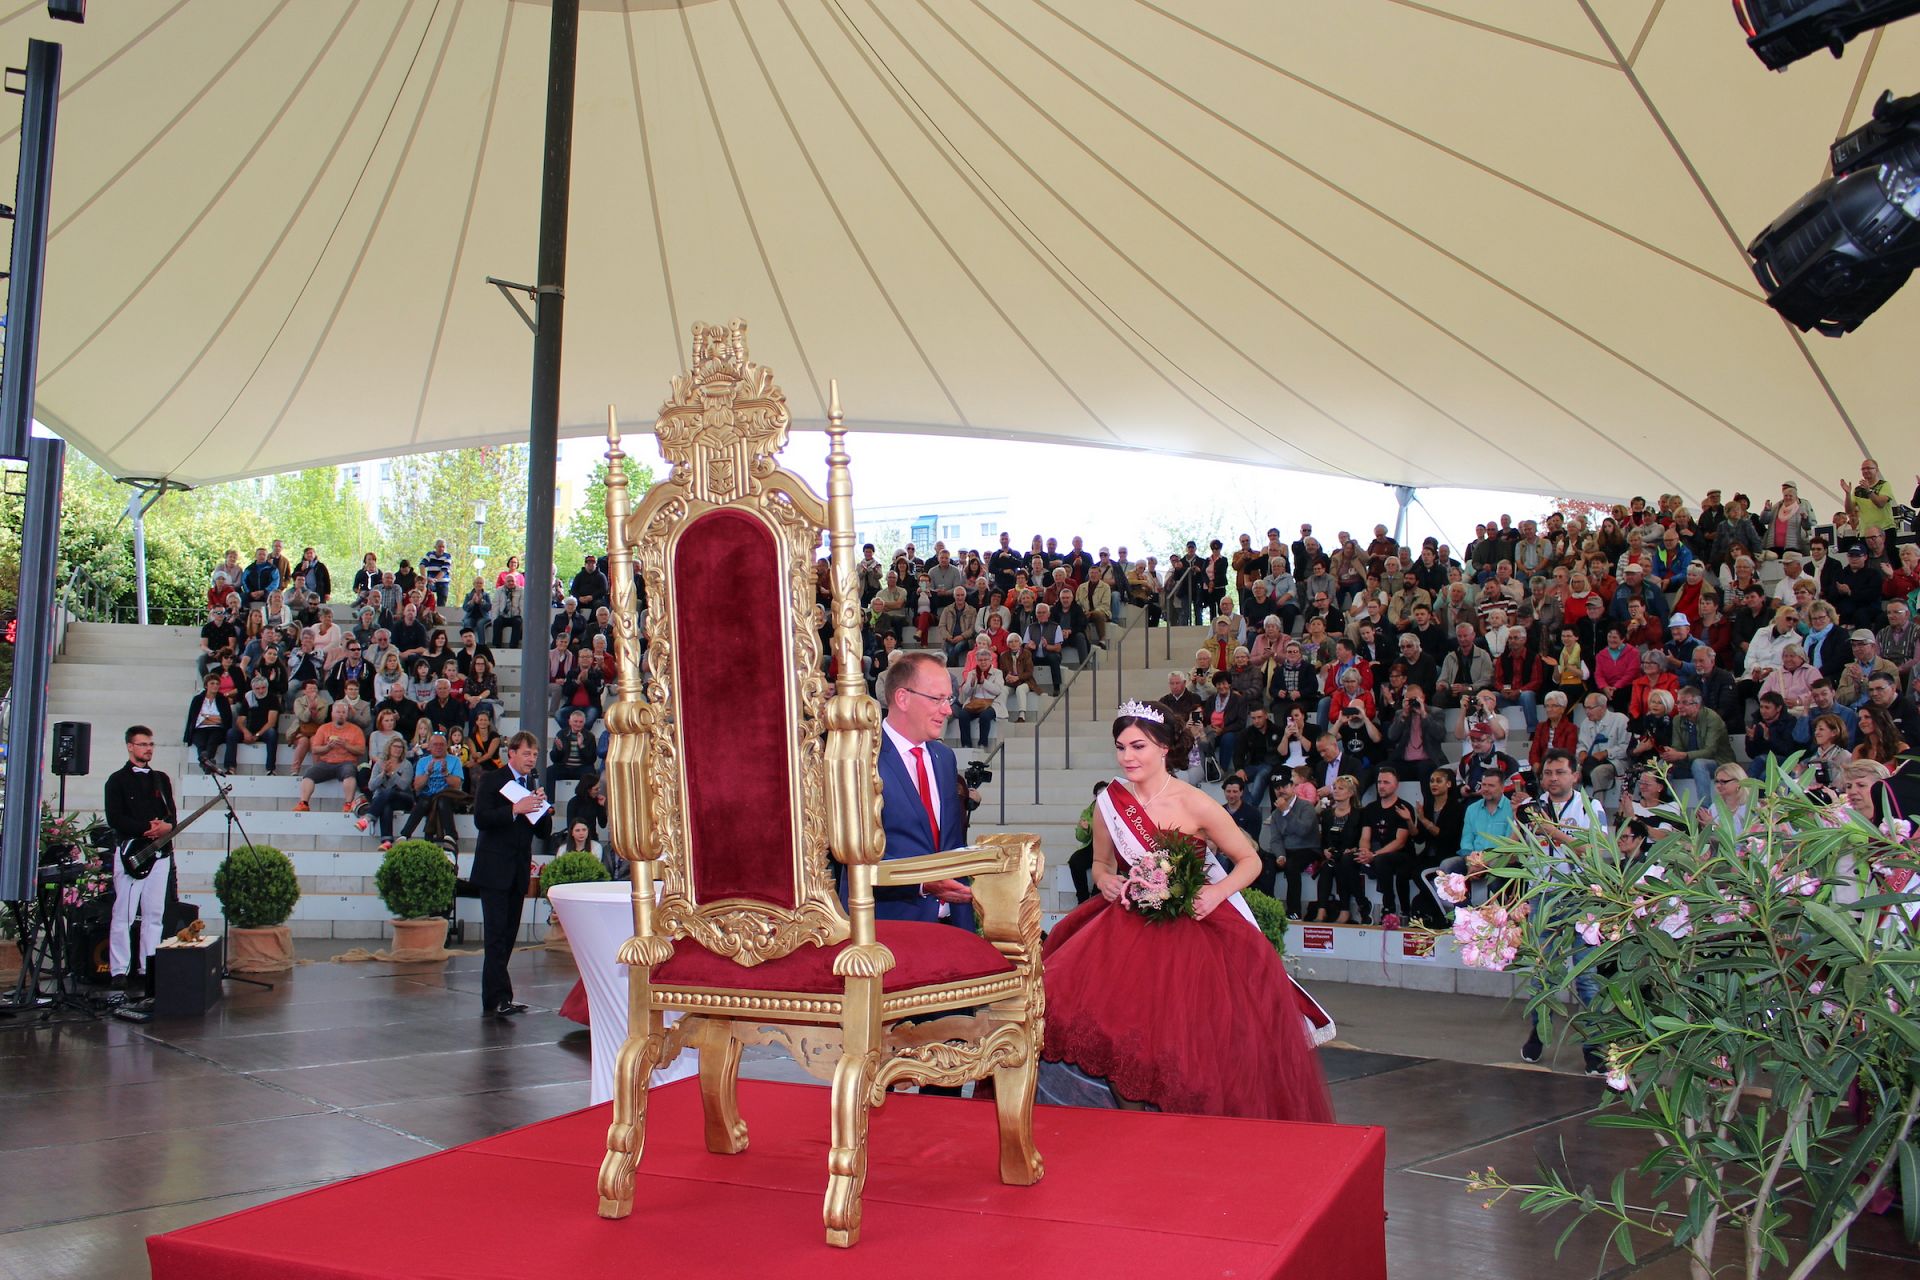 Mountain & Rose Festival with Crowning of the Majesty 